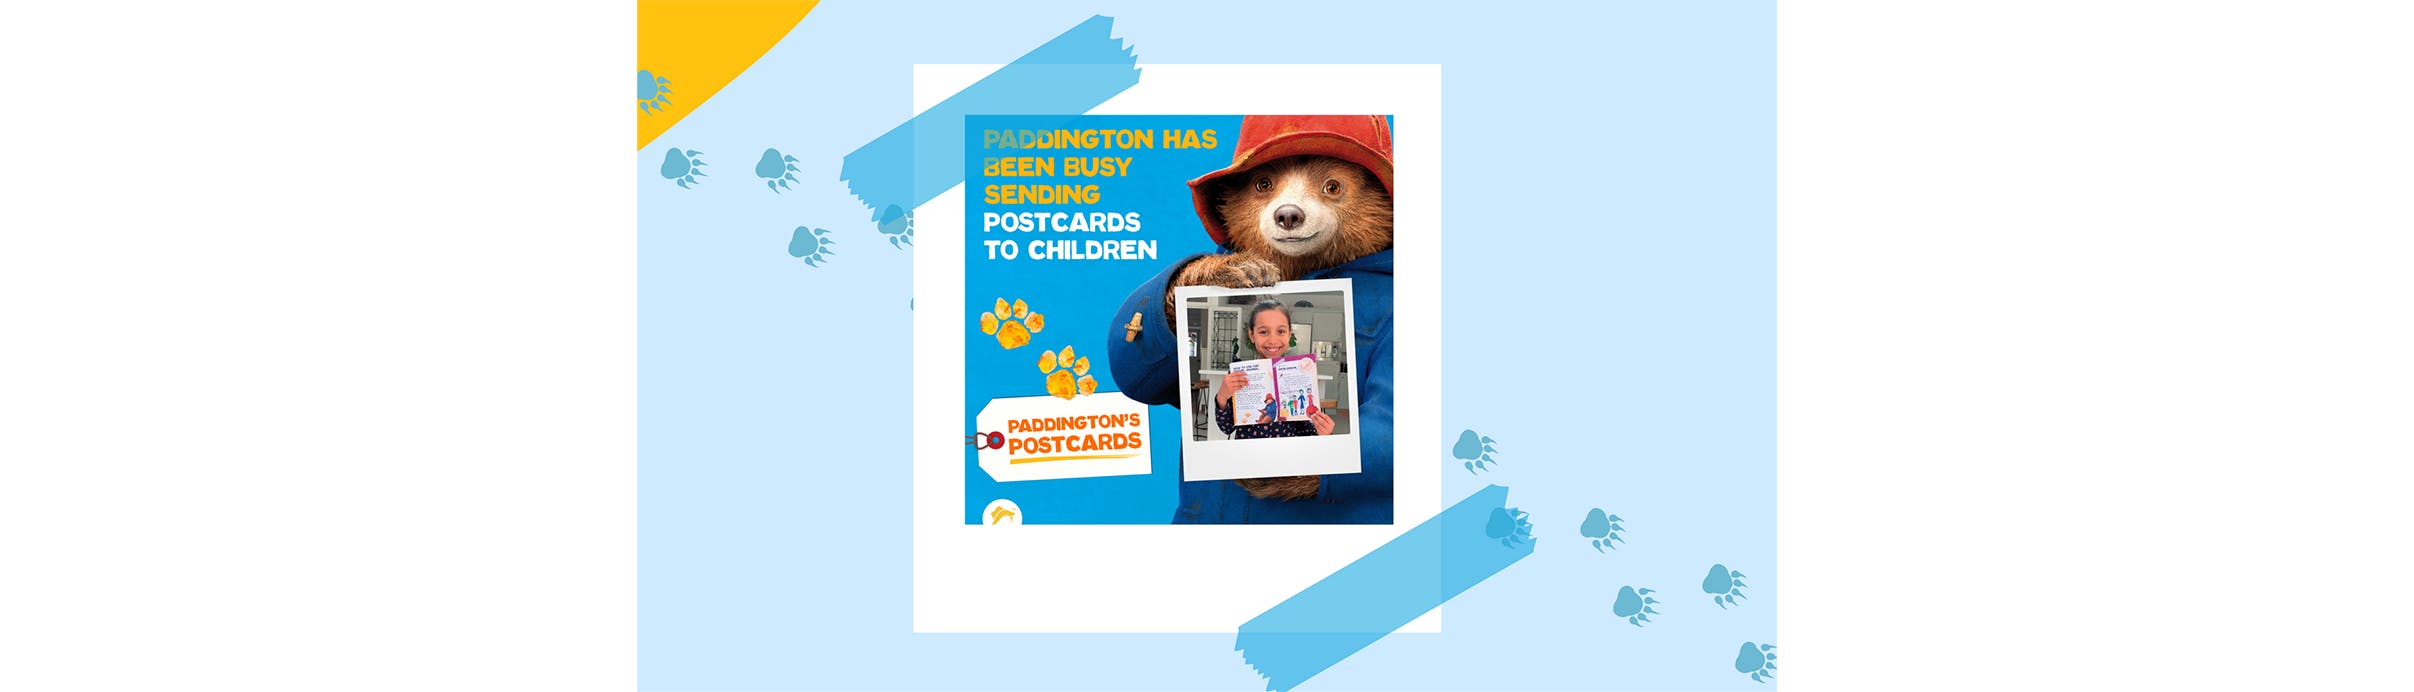 Get your personalised postcard from Paddington - sign up now!